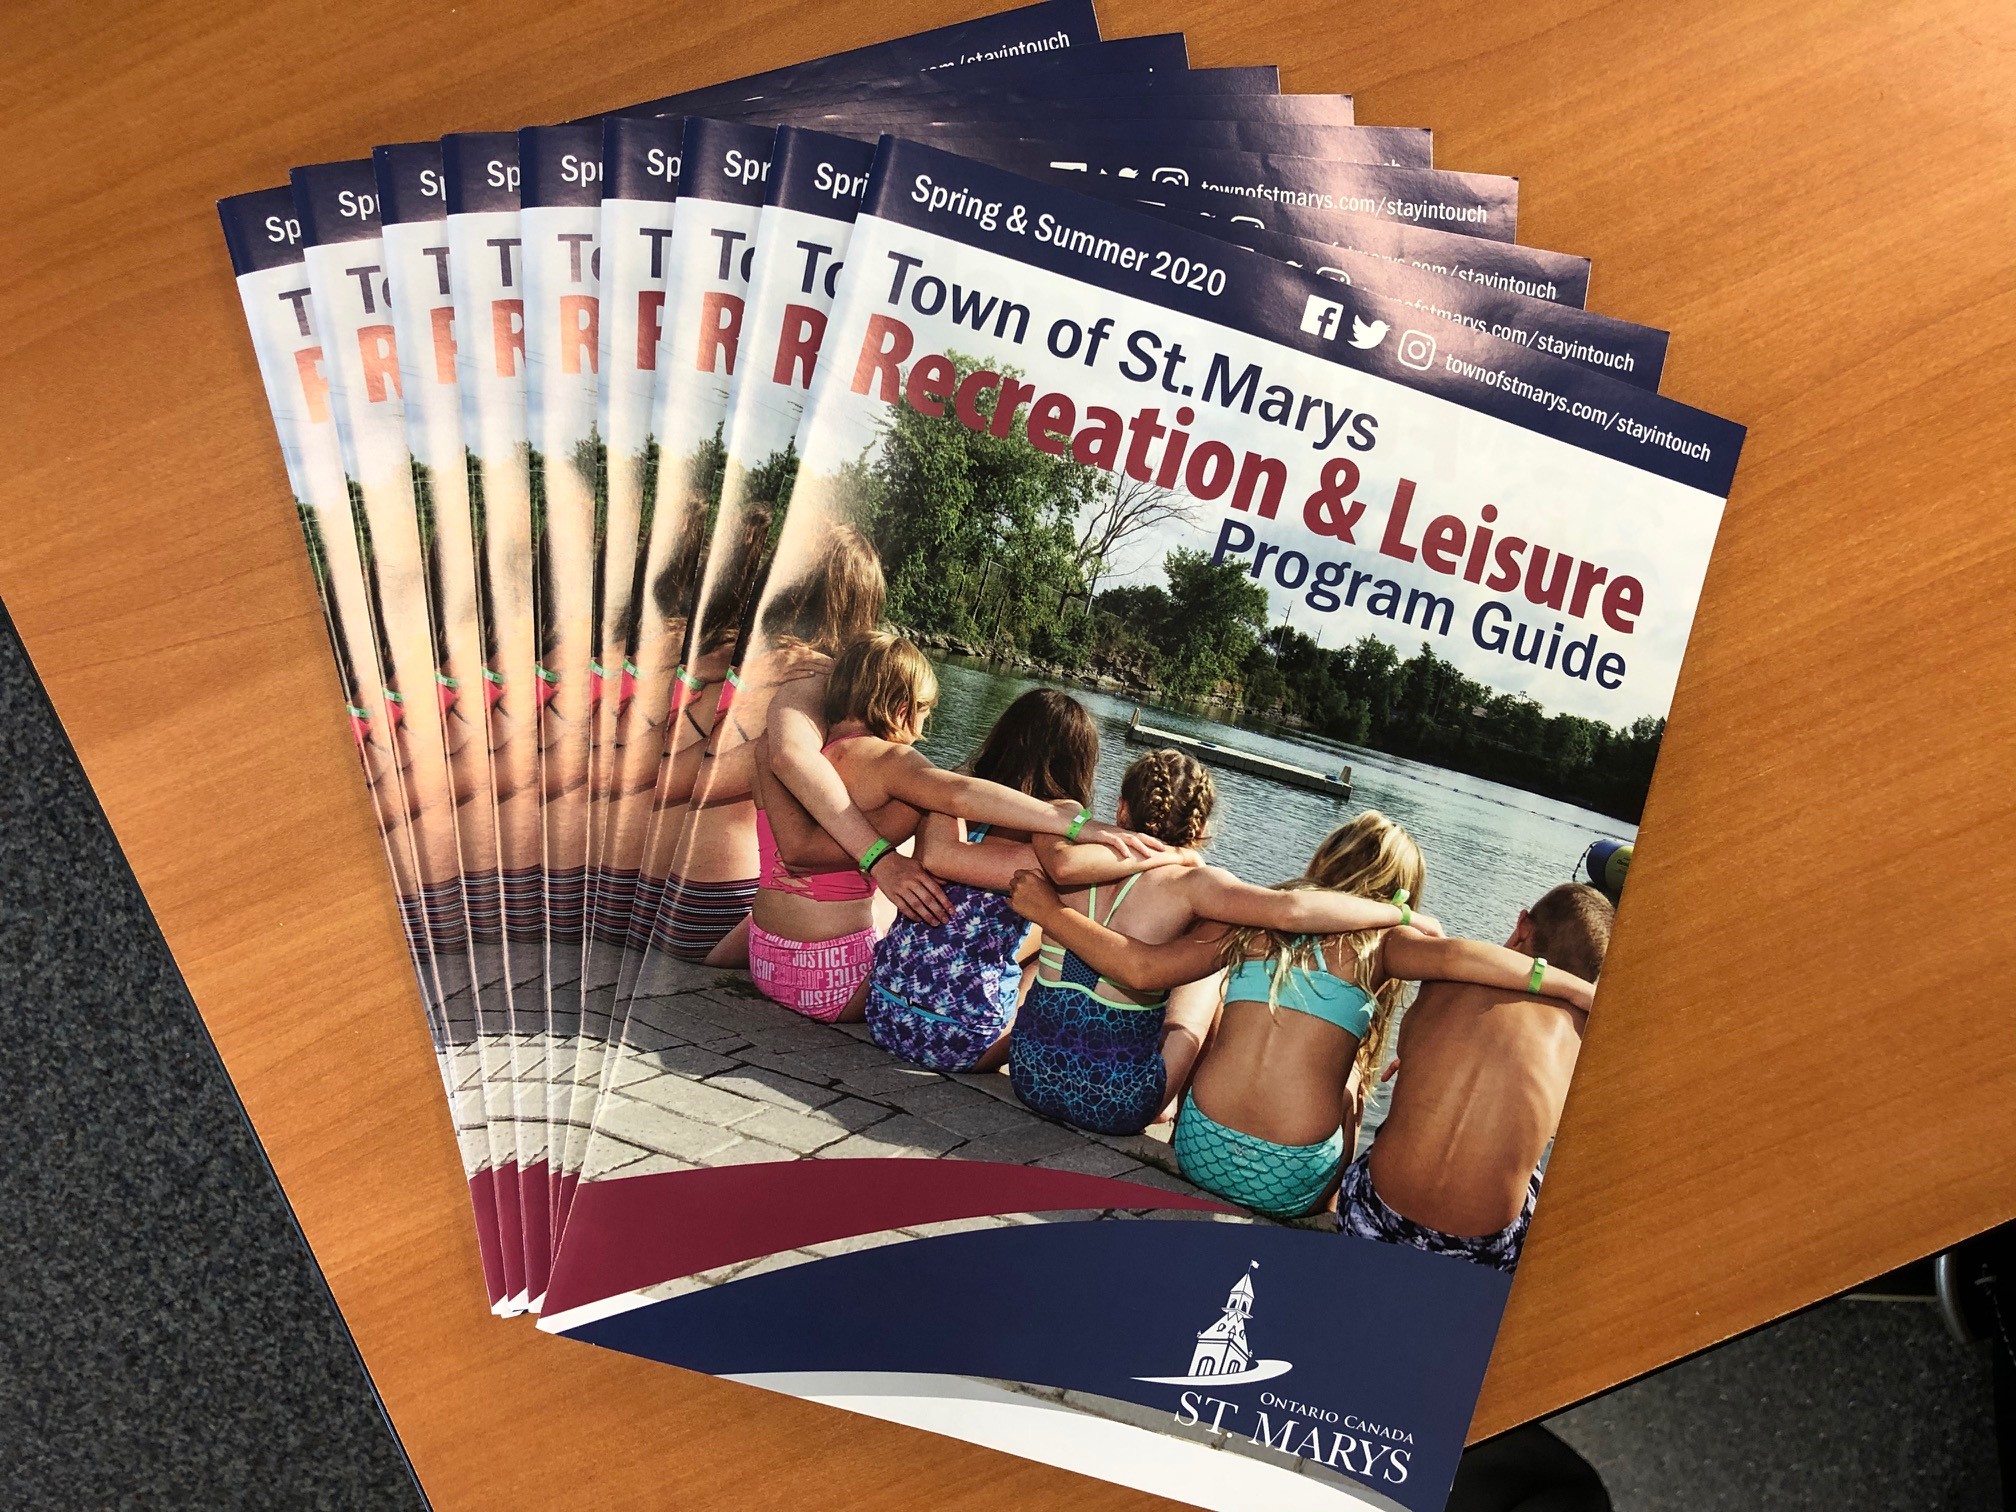 Copies of spring and summer rec & leisure guide